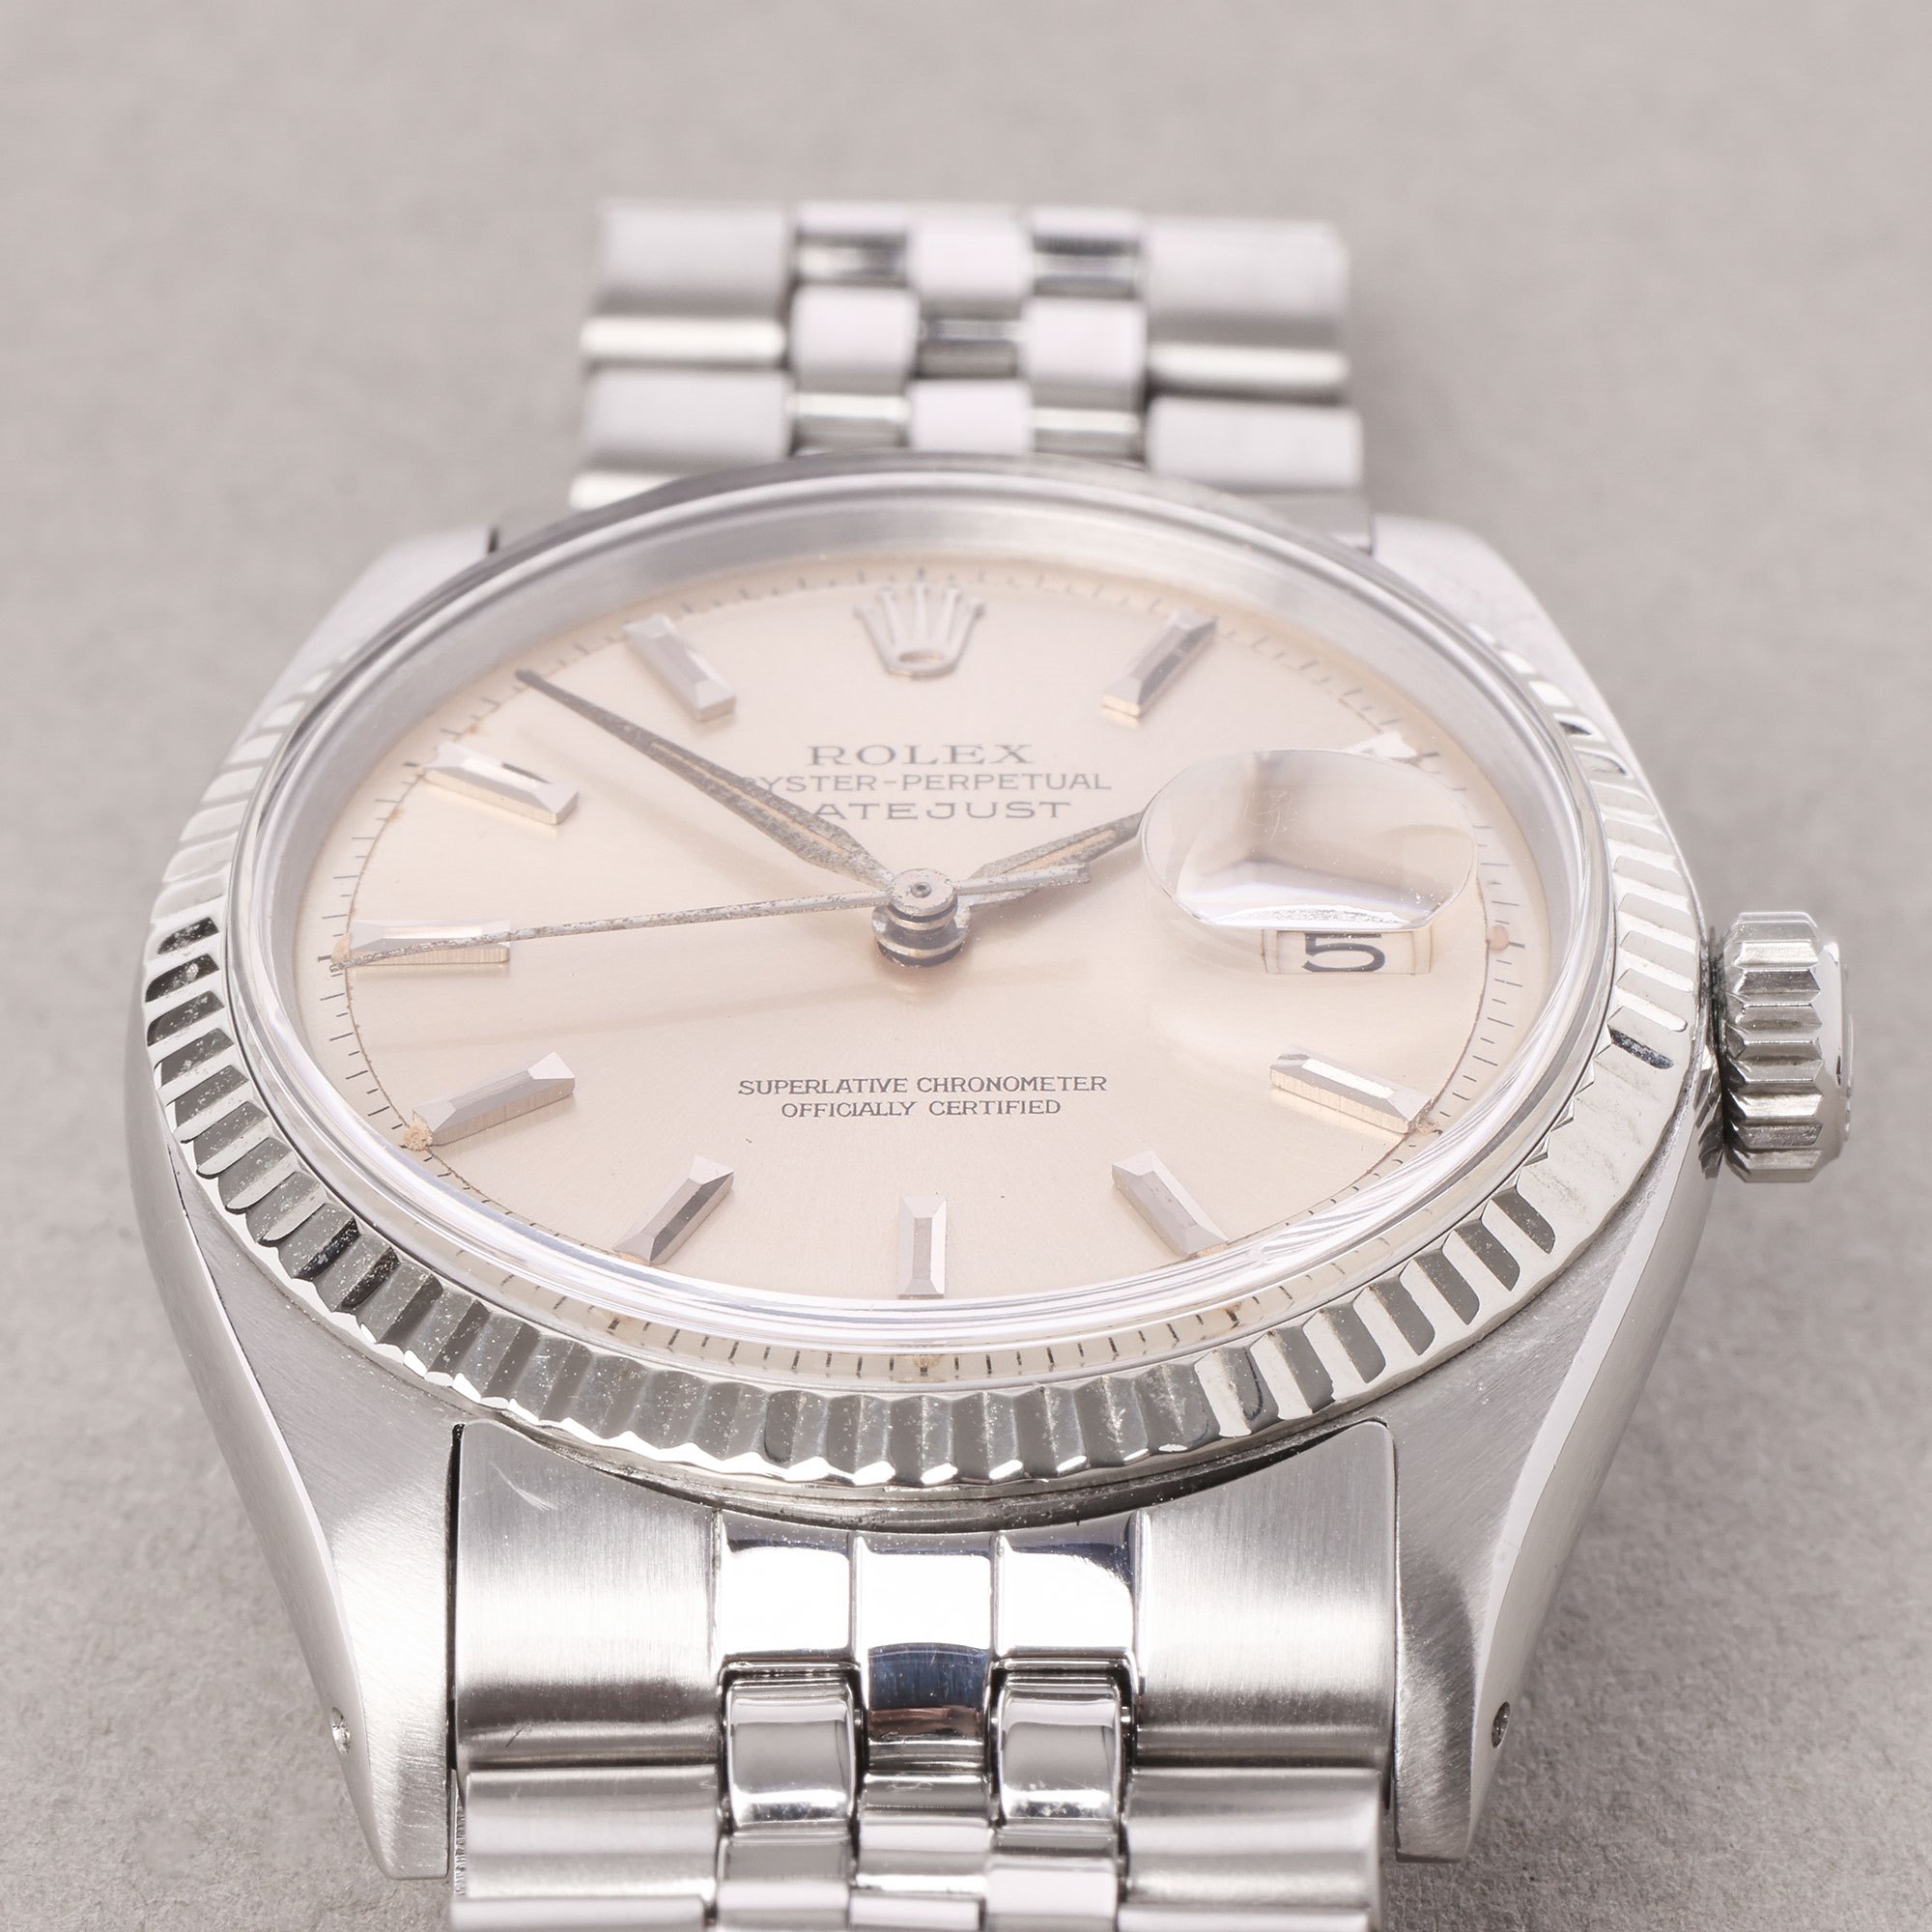 Rolex Datejust 36 Sword Hands 18K White Gold & Stainless Steel Watch 1601 - Image 10 of 10